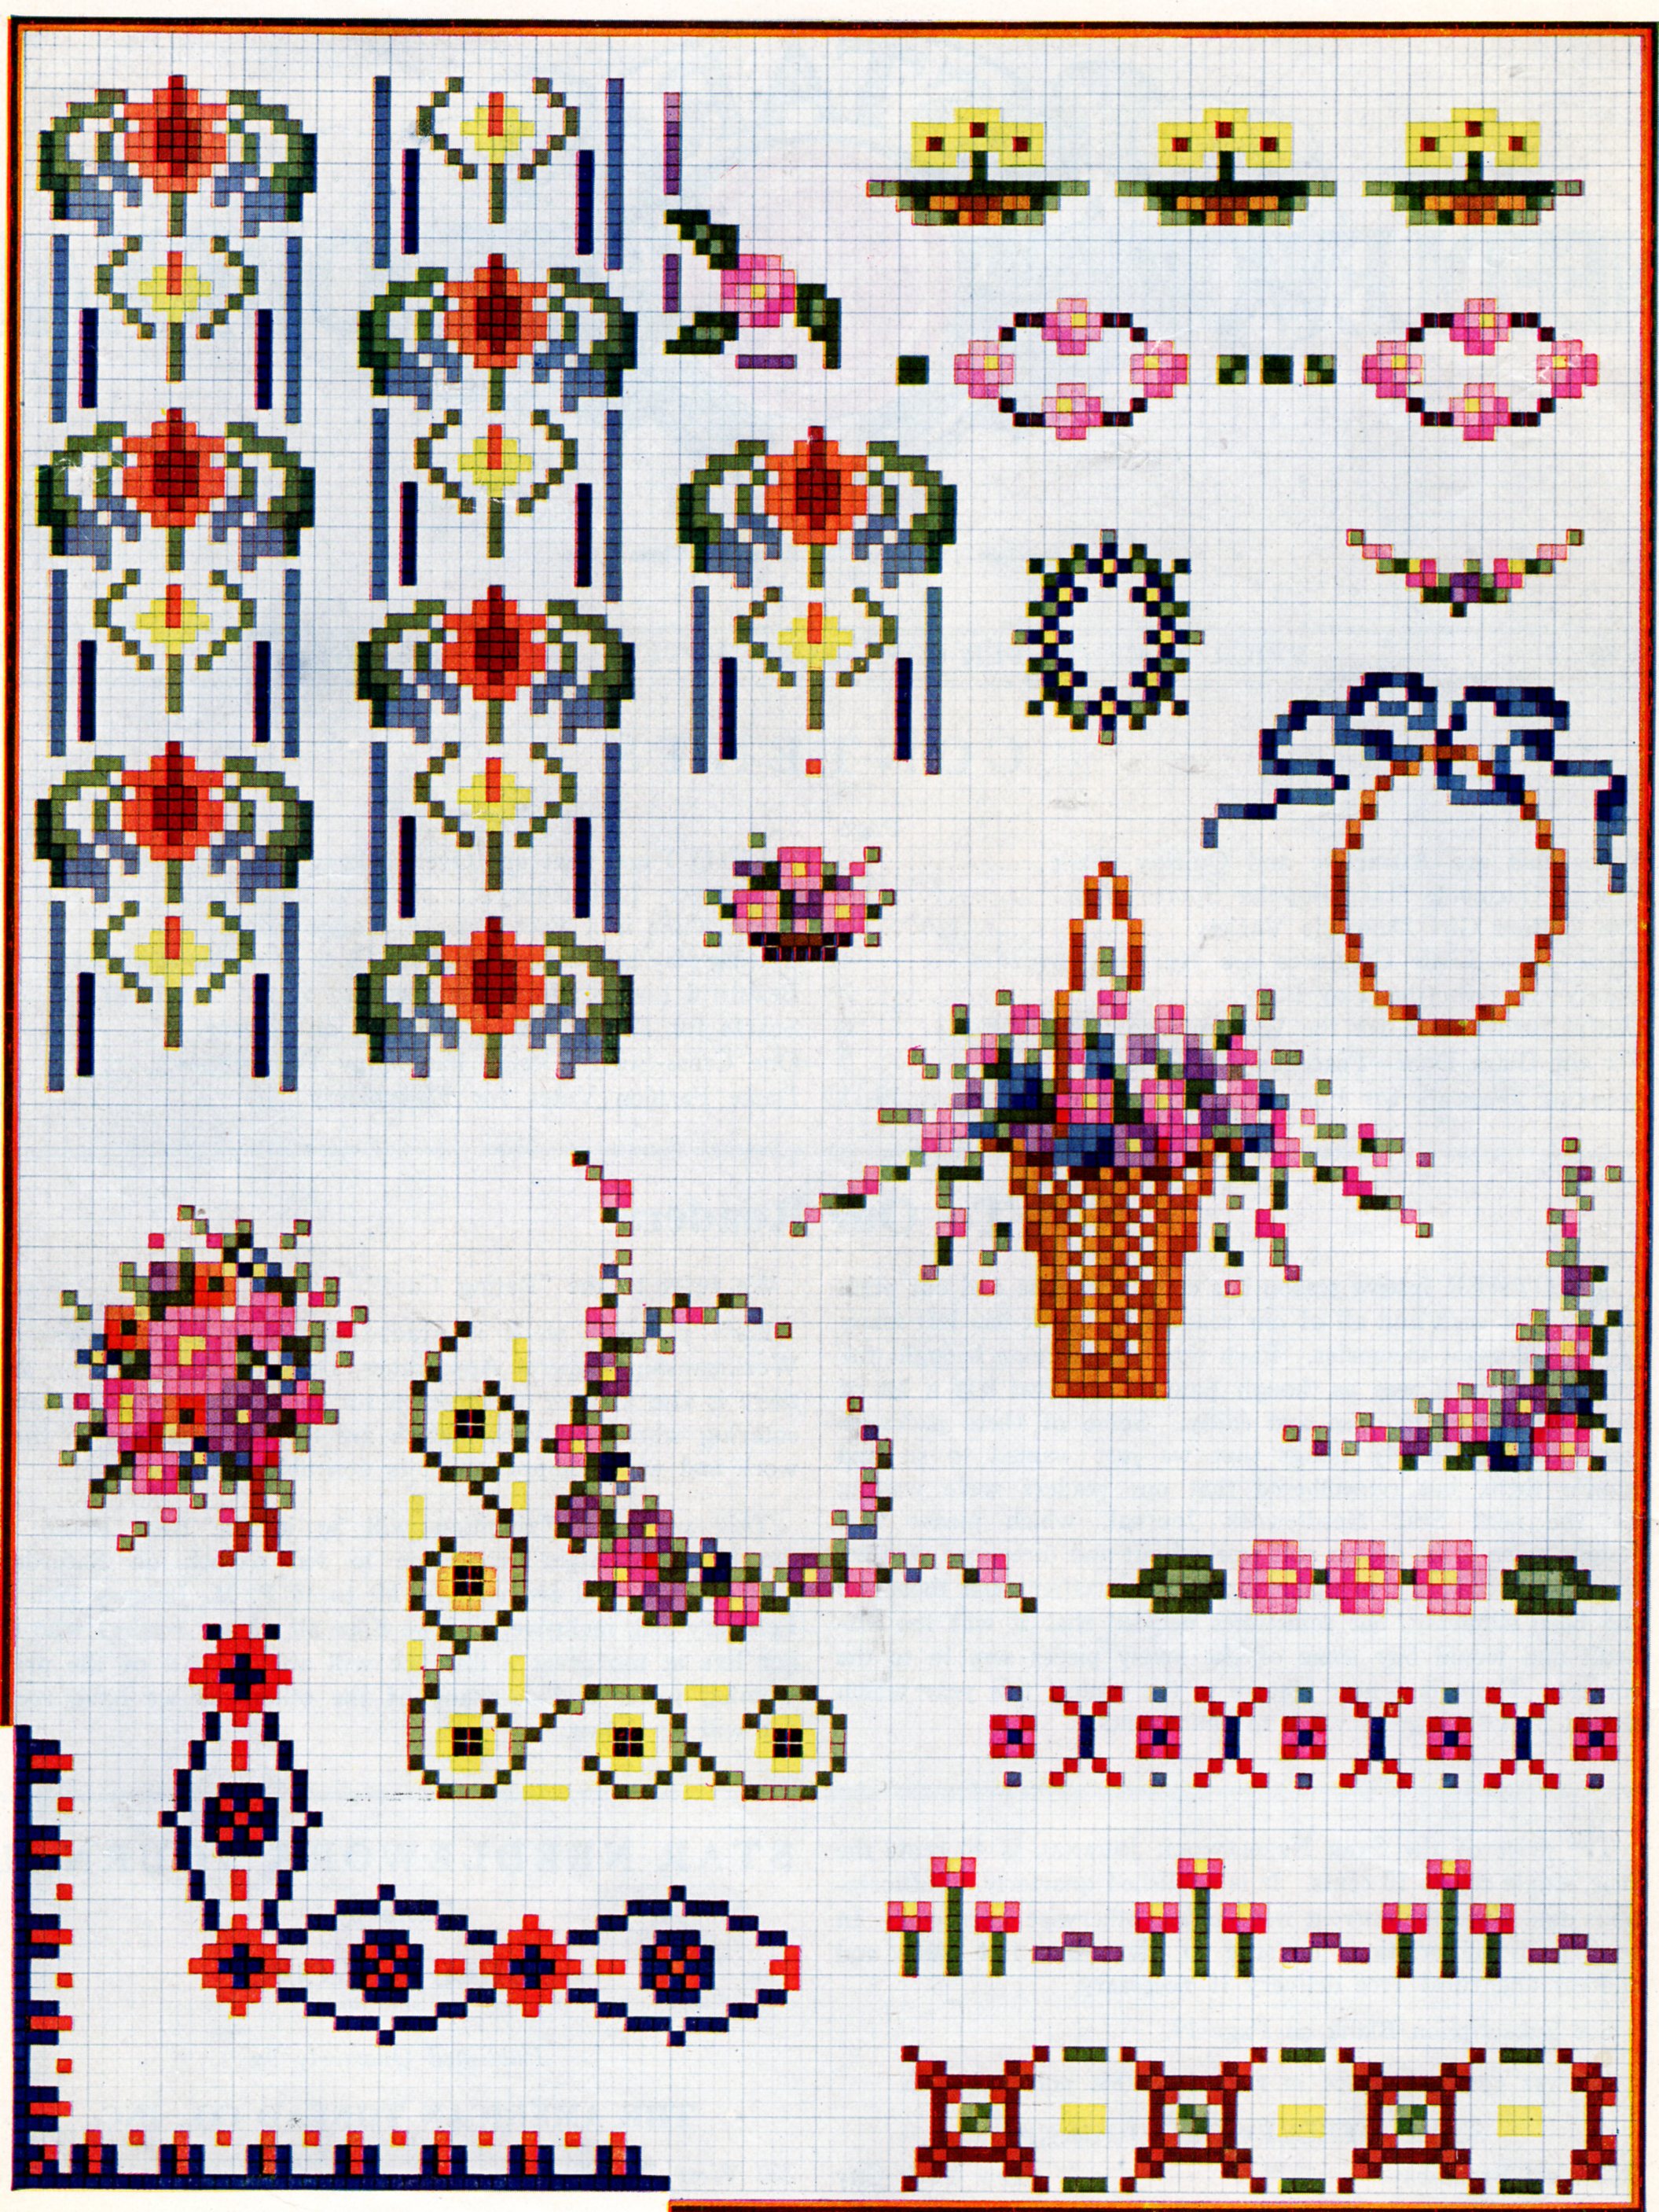 spring-time-cross-stitch-pattern-designs-of-flowers-borders-and